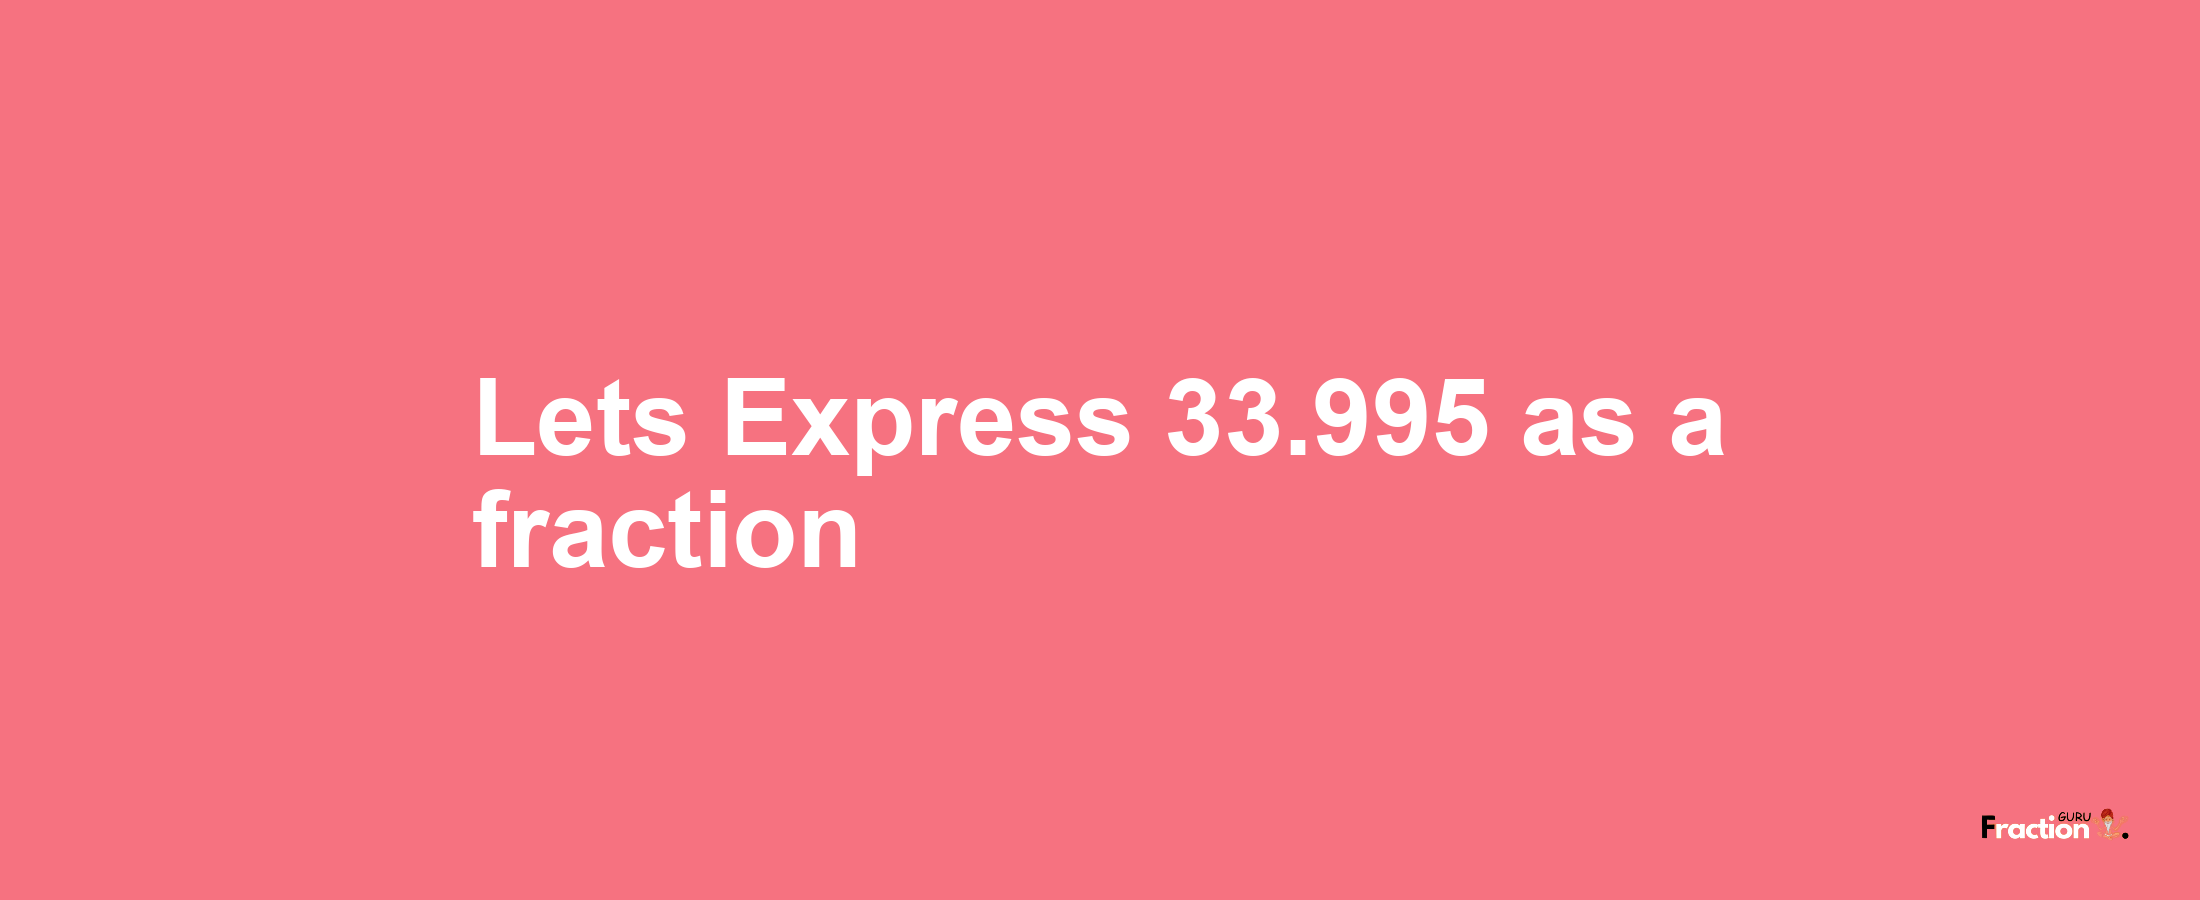 Lets Express 33.995 as afraction